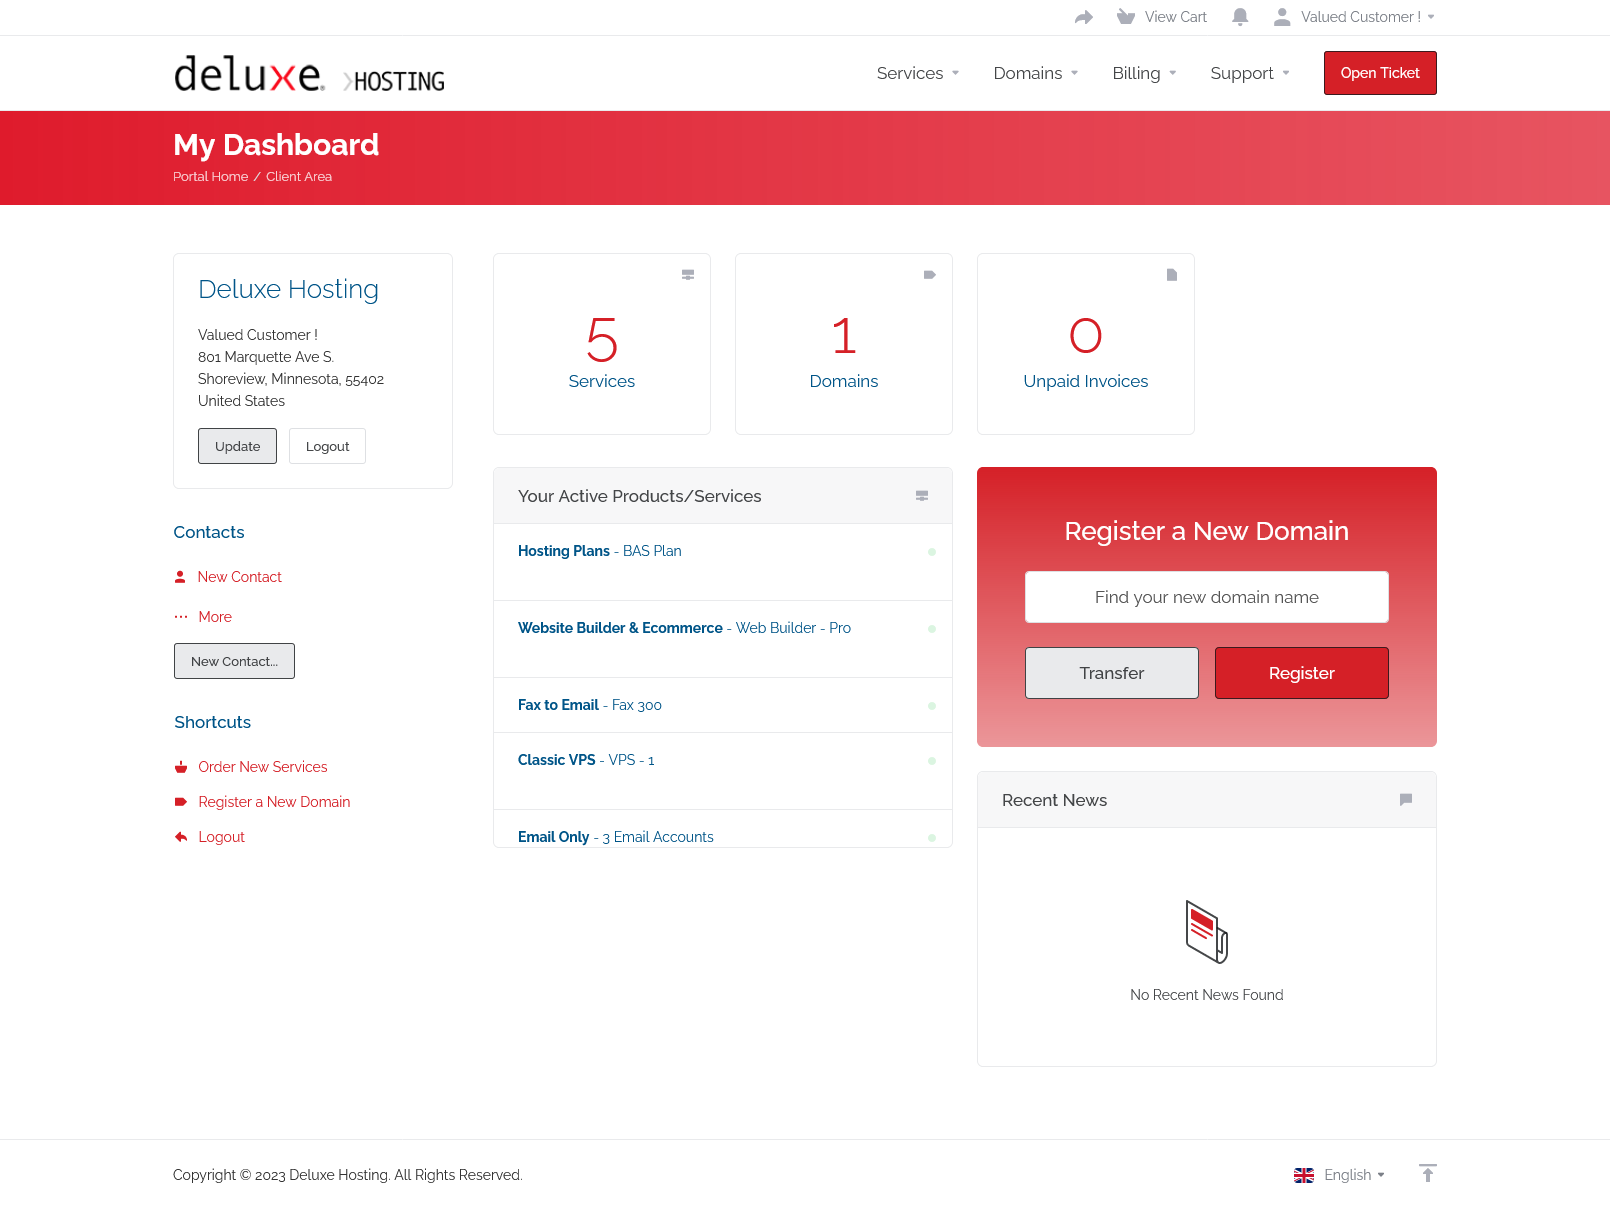 Deluxe Hosting home page